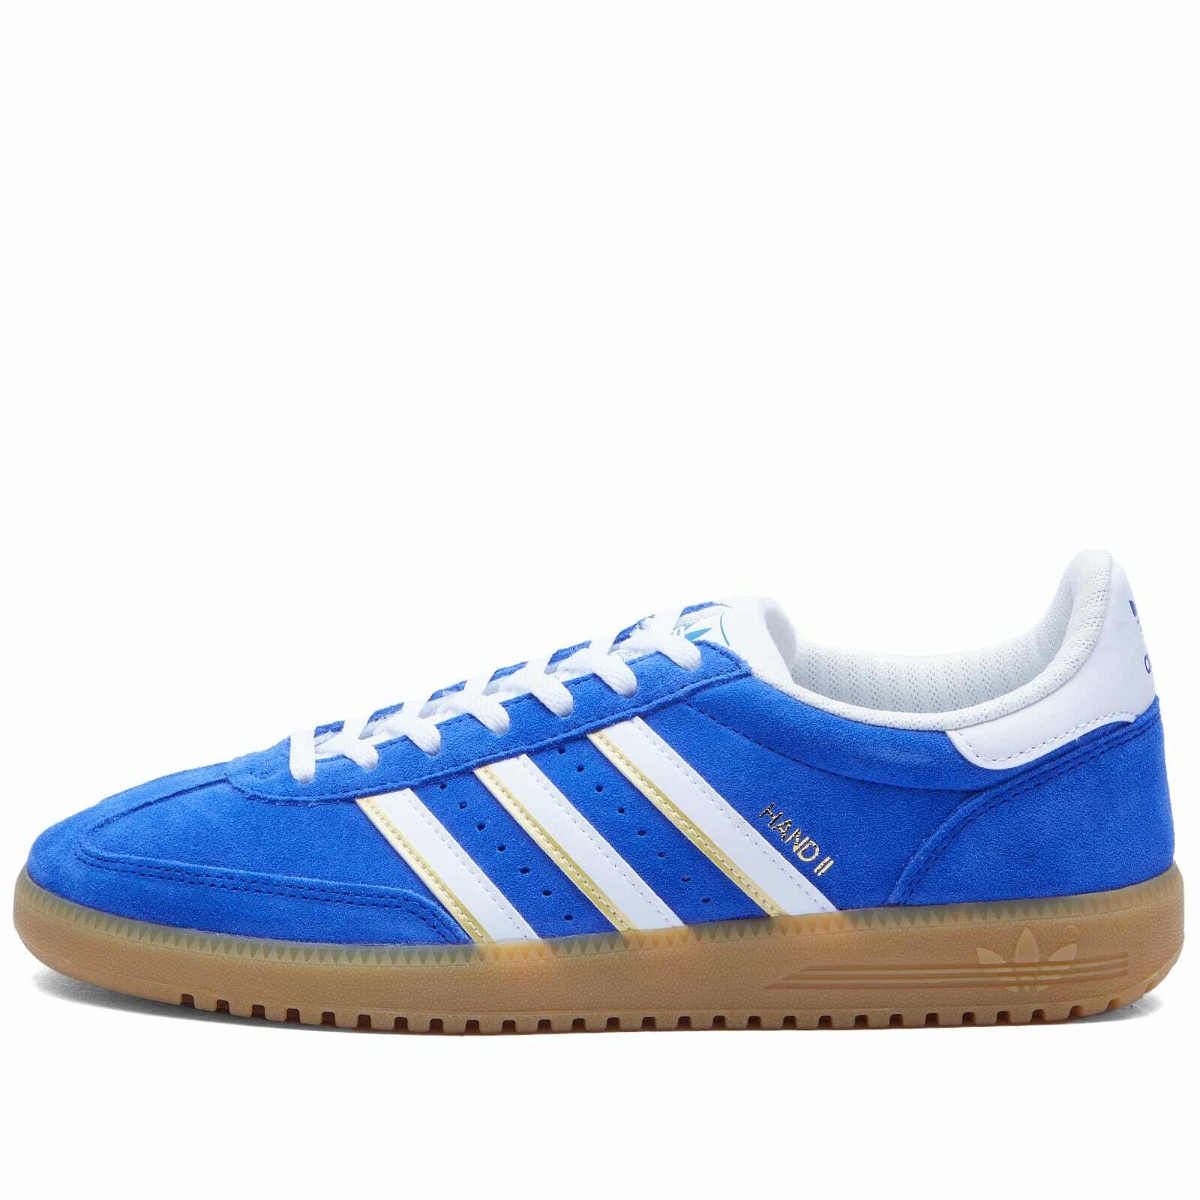 Adidas Hand 2 Sneakers in Semi Lucid Blue/White adidas | 